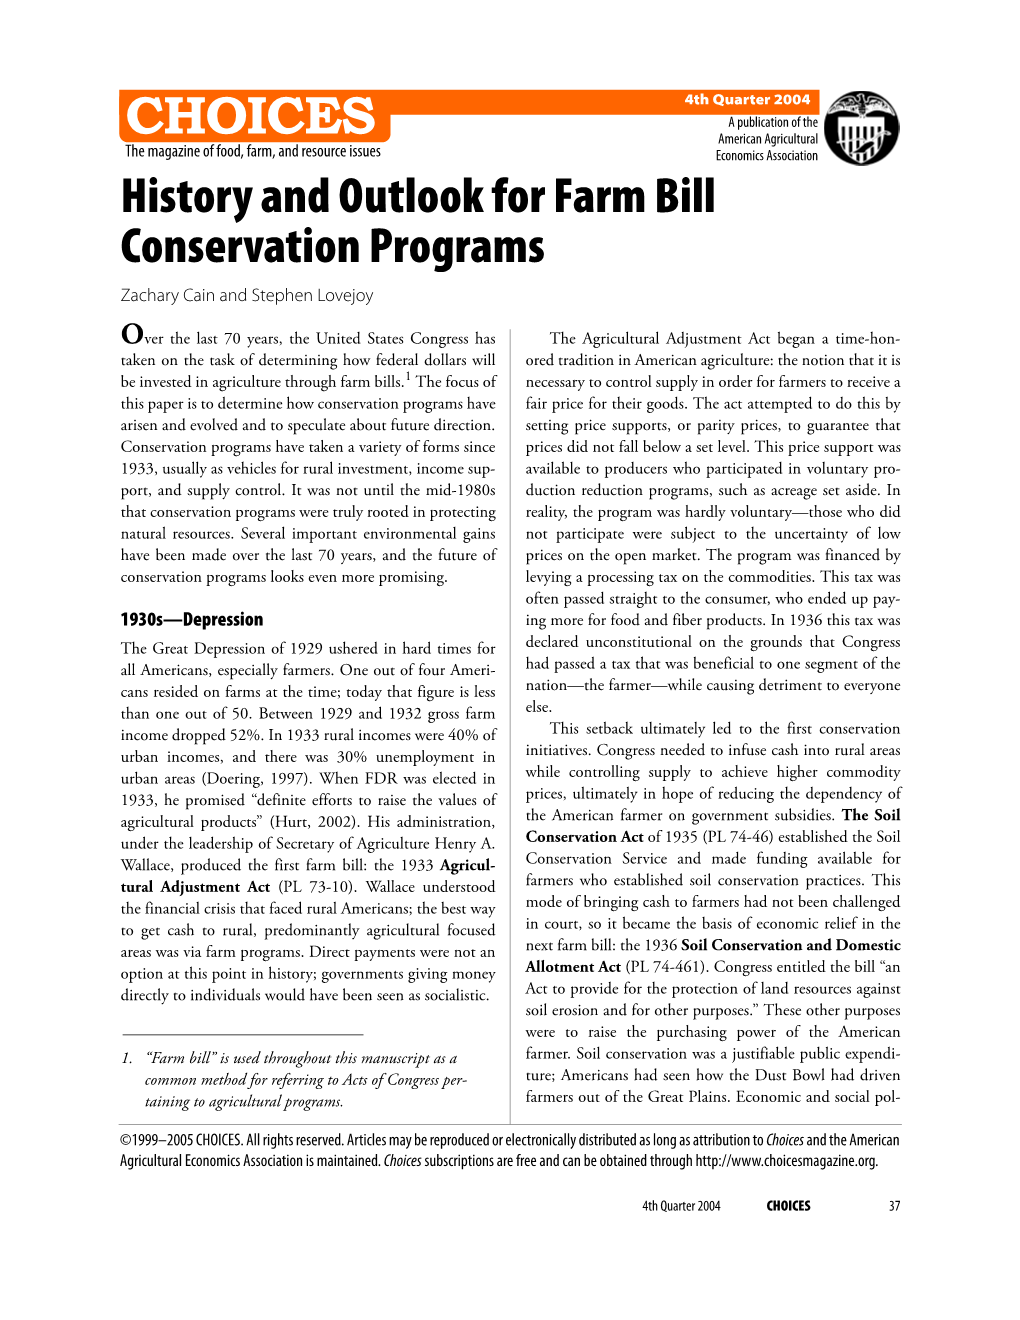 History and Outlook for Farm Bill Conservation Programs Zachary Cain and Stephen Lovejoy